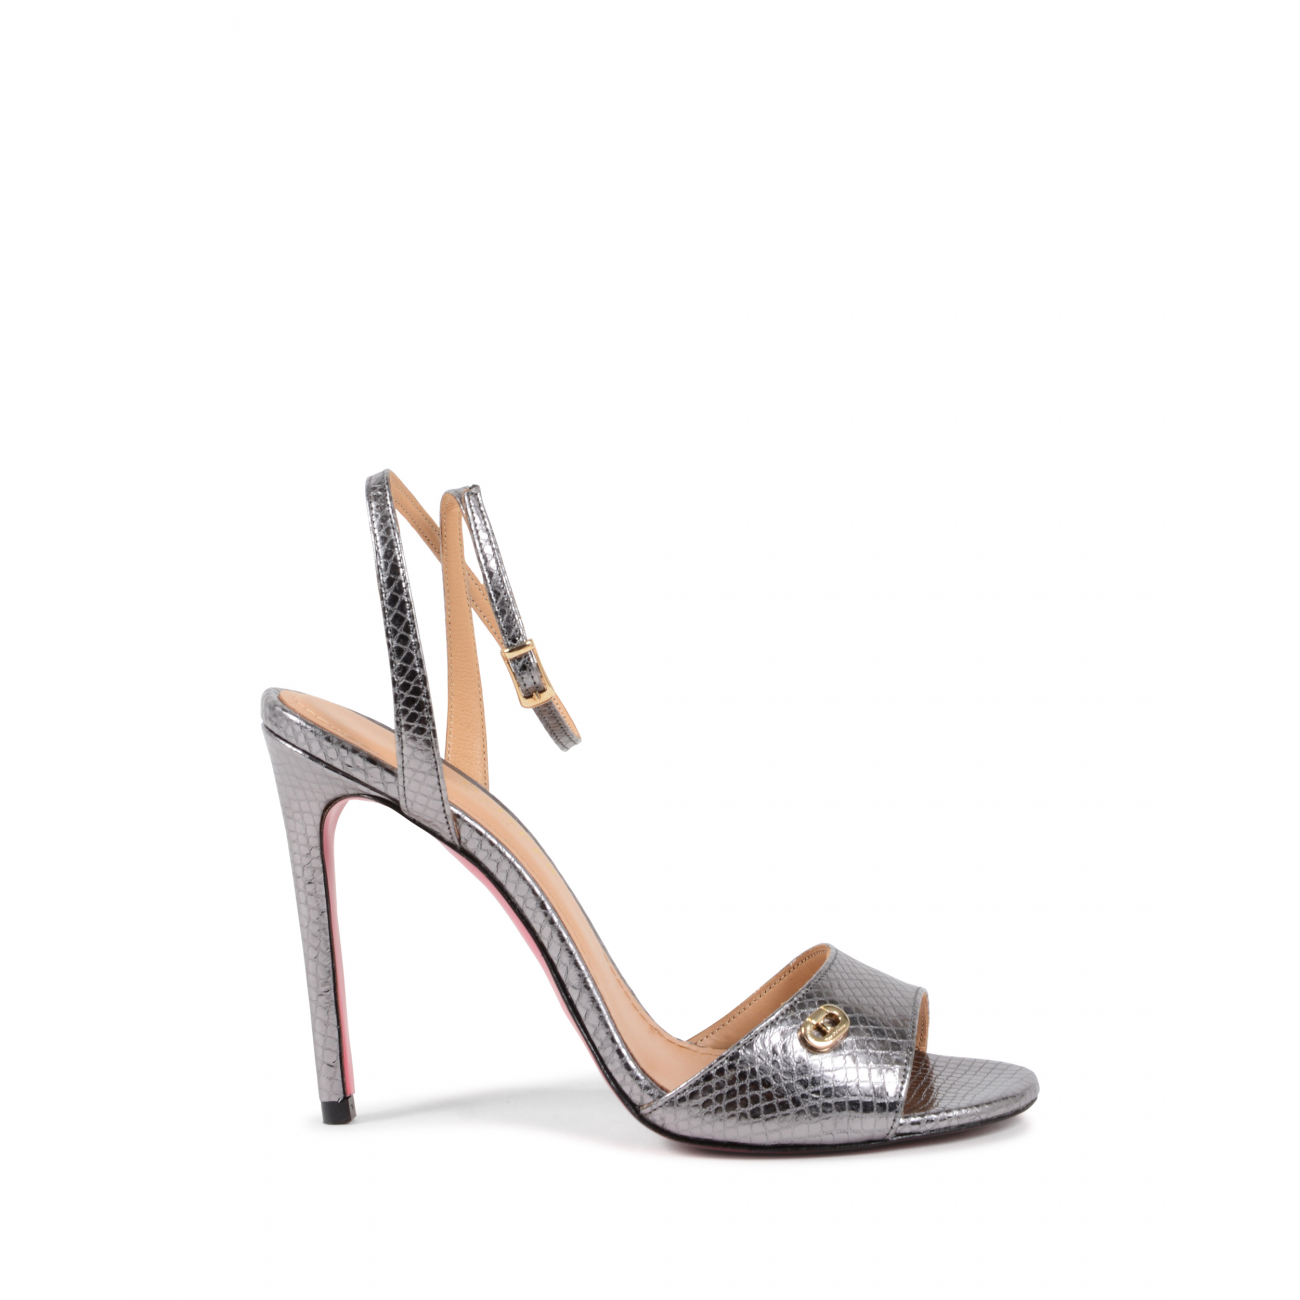 Dee Ocleppo Women's Ankle Strap Sandal Silver 302 STAMP. PITONE SILVER